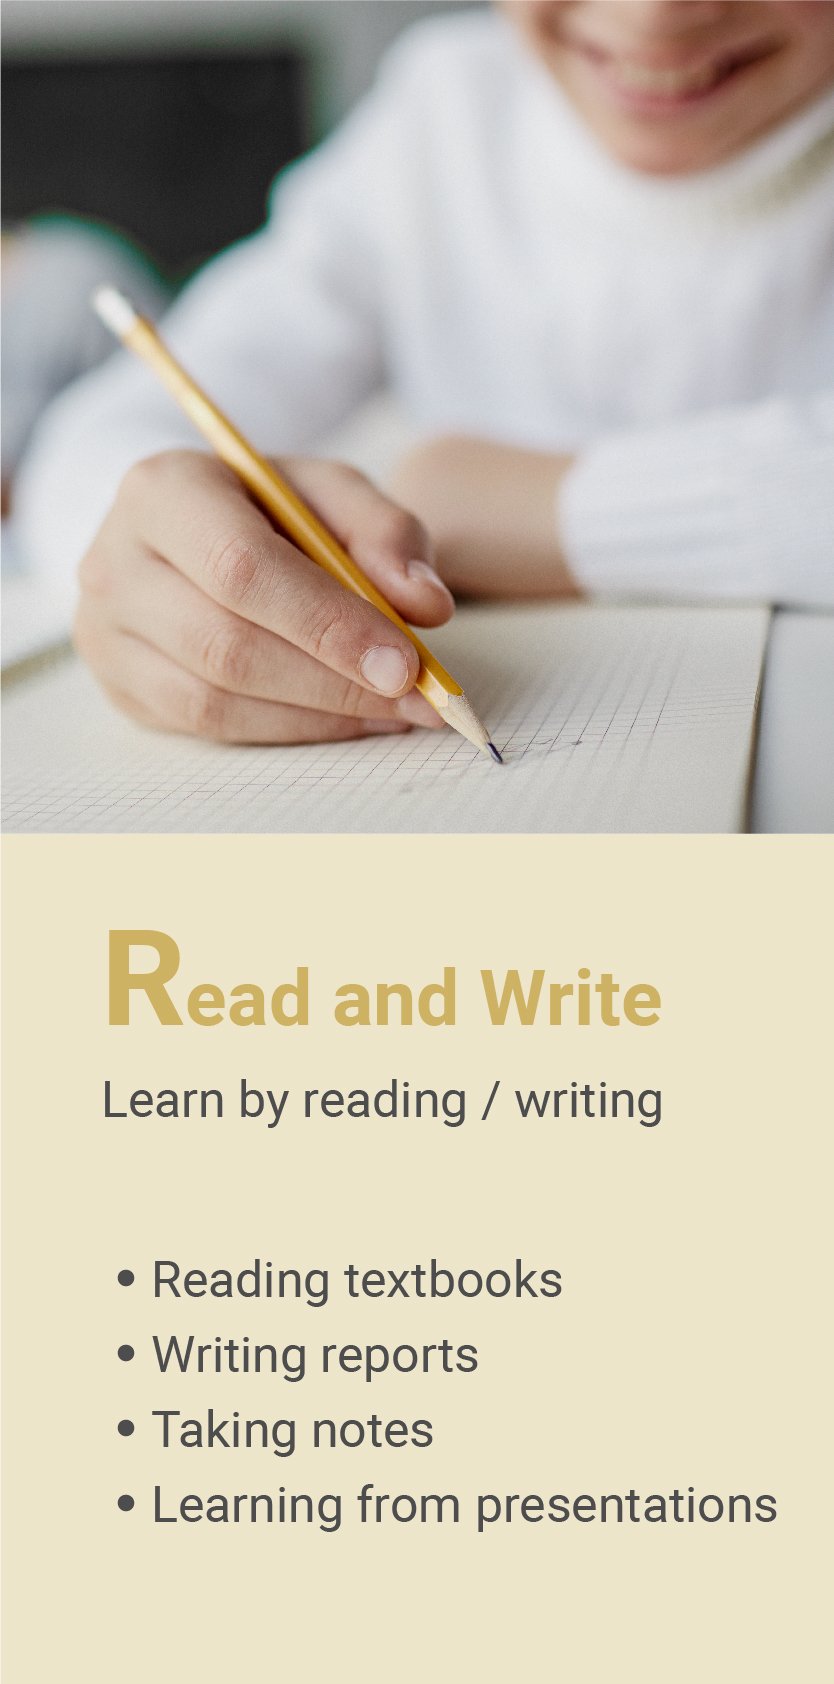 Different types of learners: Read and Write learners - learn by reading and writing